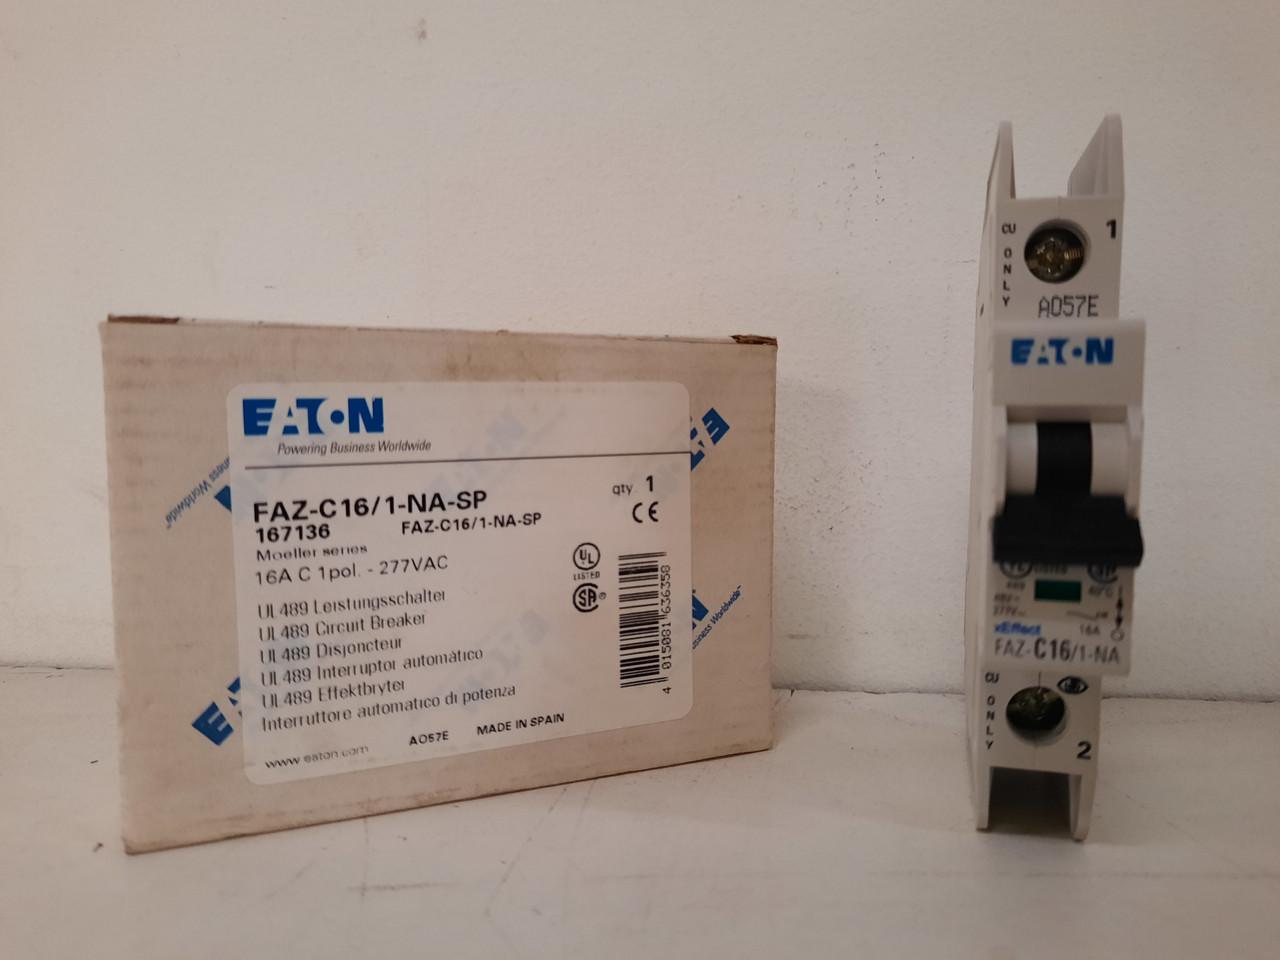 Eaton FAZ-C16/1-NA-SP Eaton FAZ branch protector,UL 489 Industrial miniature circuit breaker - supplementary protector,Single package,Medium levels of inrush current are expected,16 A,10 kAIC,Single-pole,277 V,5-10X /n,Q38,50-60 Hz,Screw terminals,C Curve